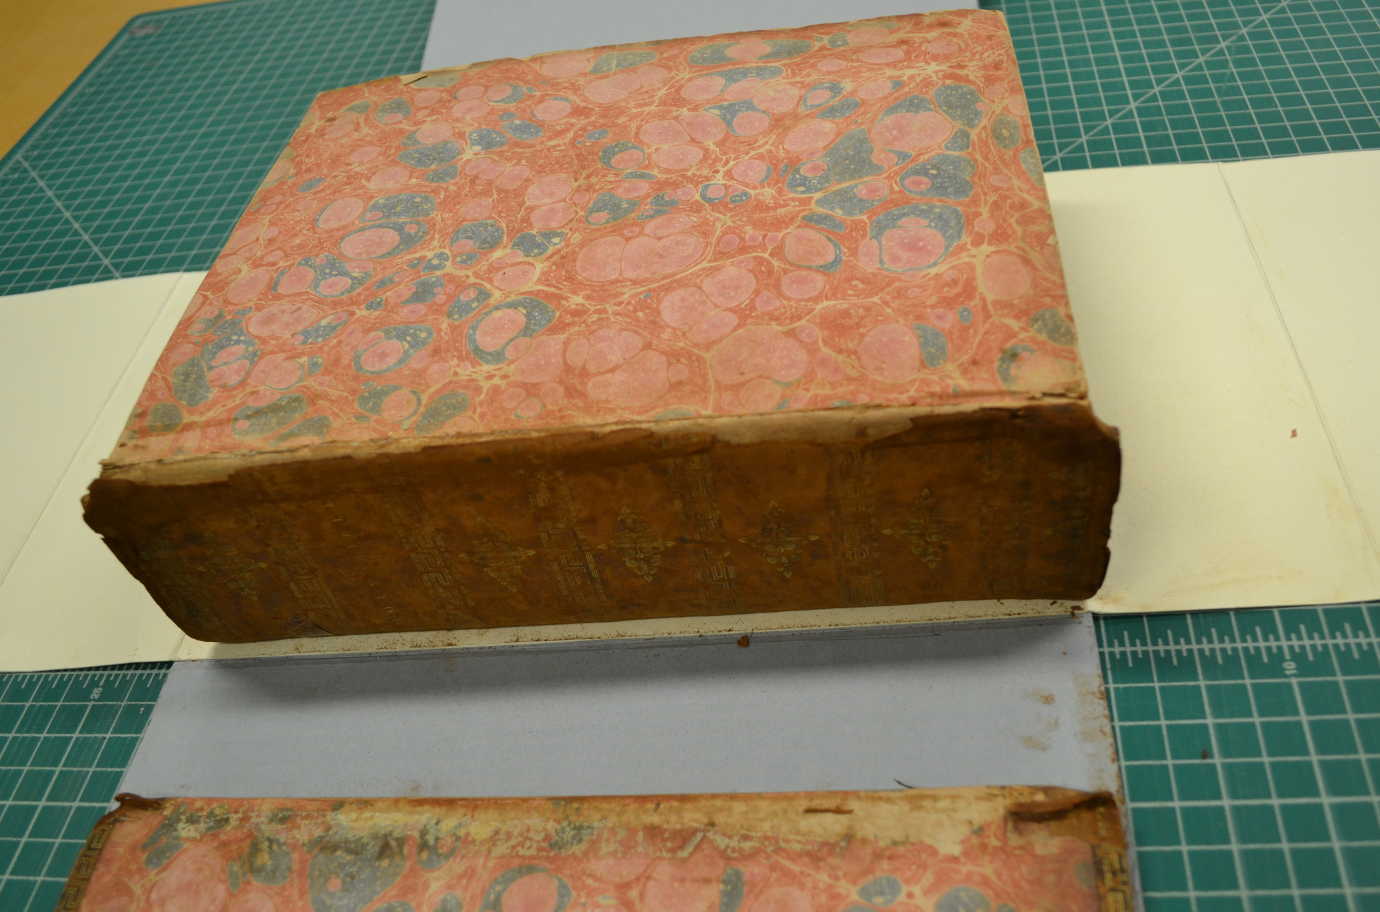 Over time, book bindings degrade and require repair. Image courtesy of Princeton Theological Seminary Library.